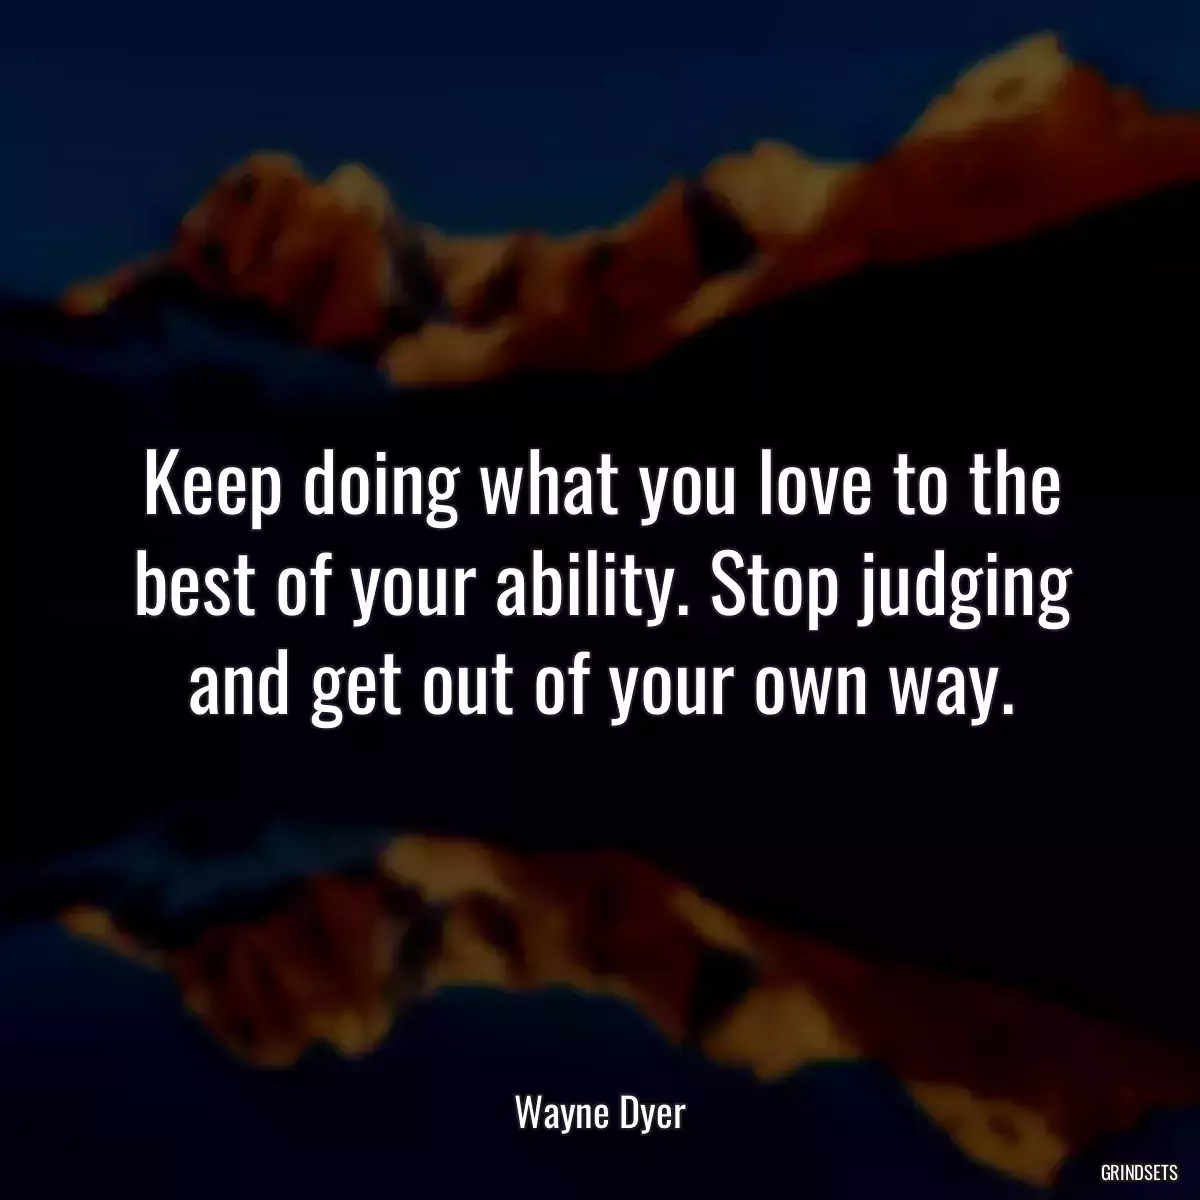 Keep doing what you love to the best of your ability. Stop judging and get out of your own way.